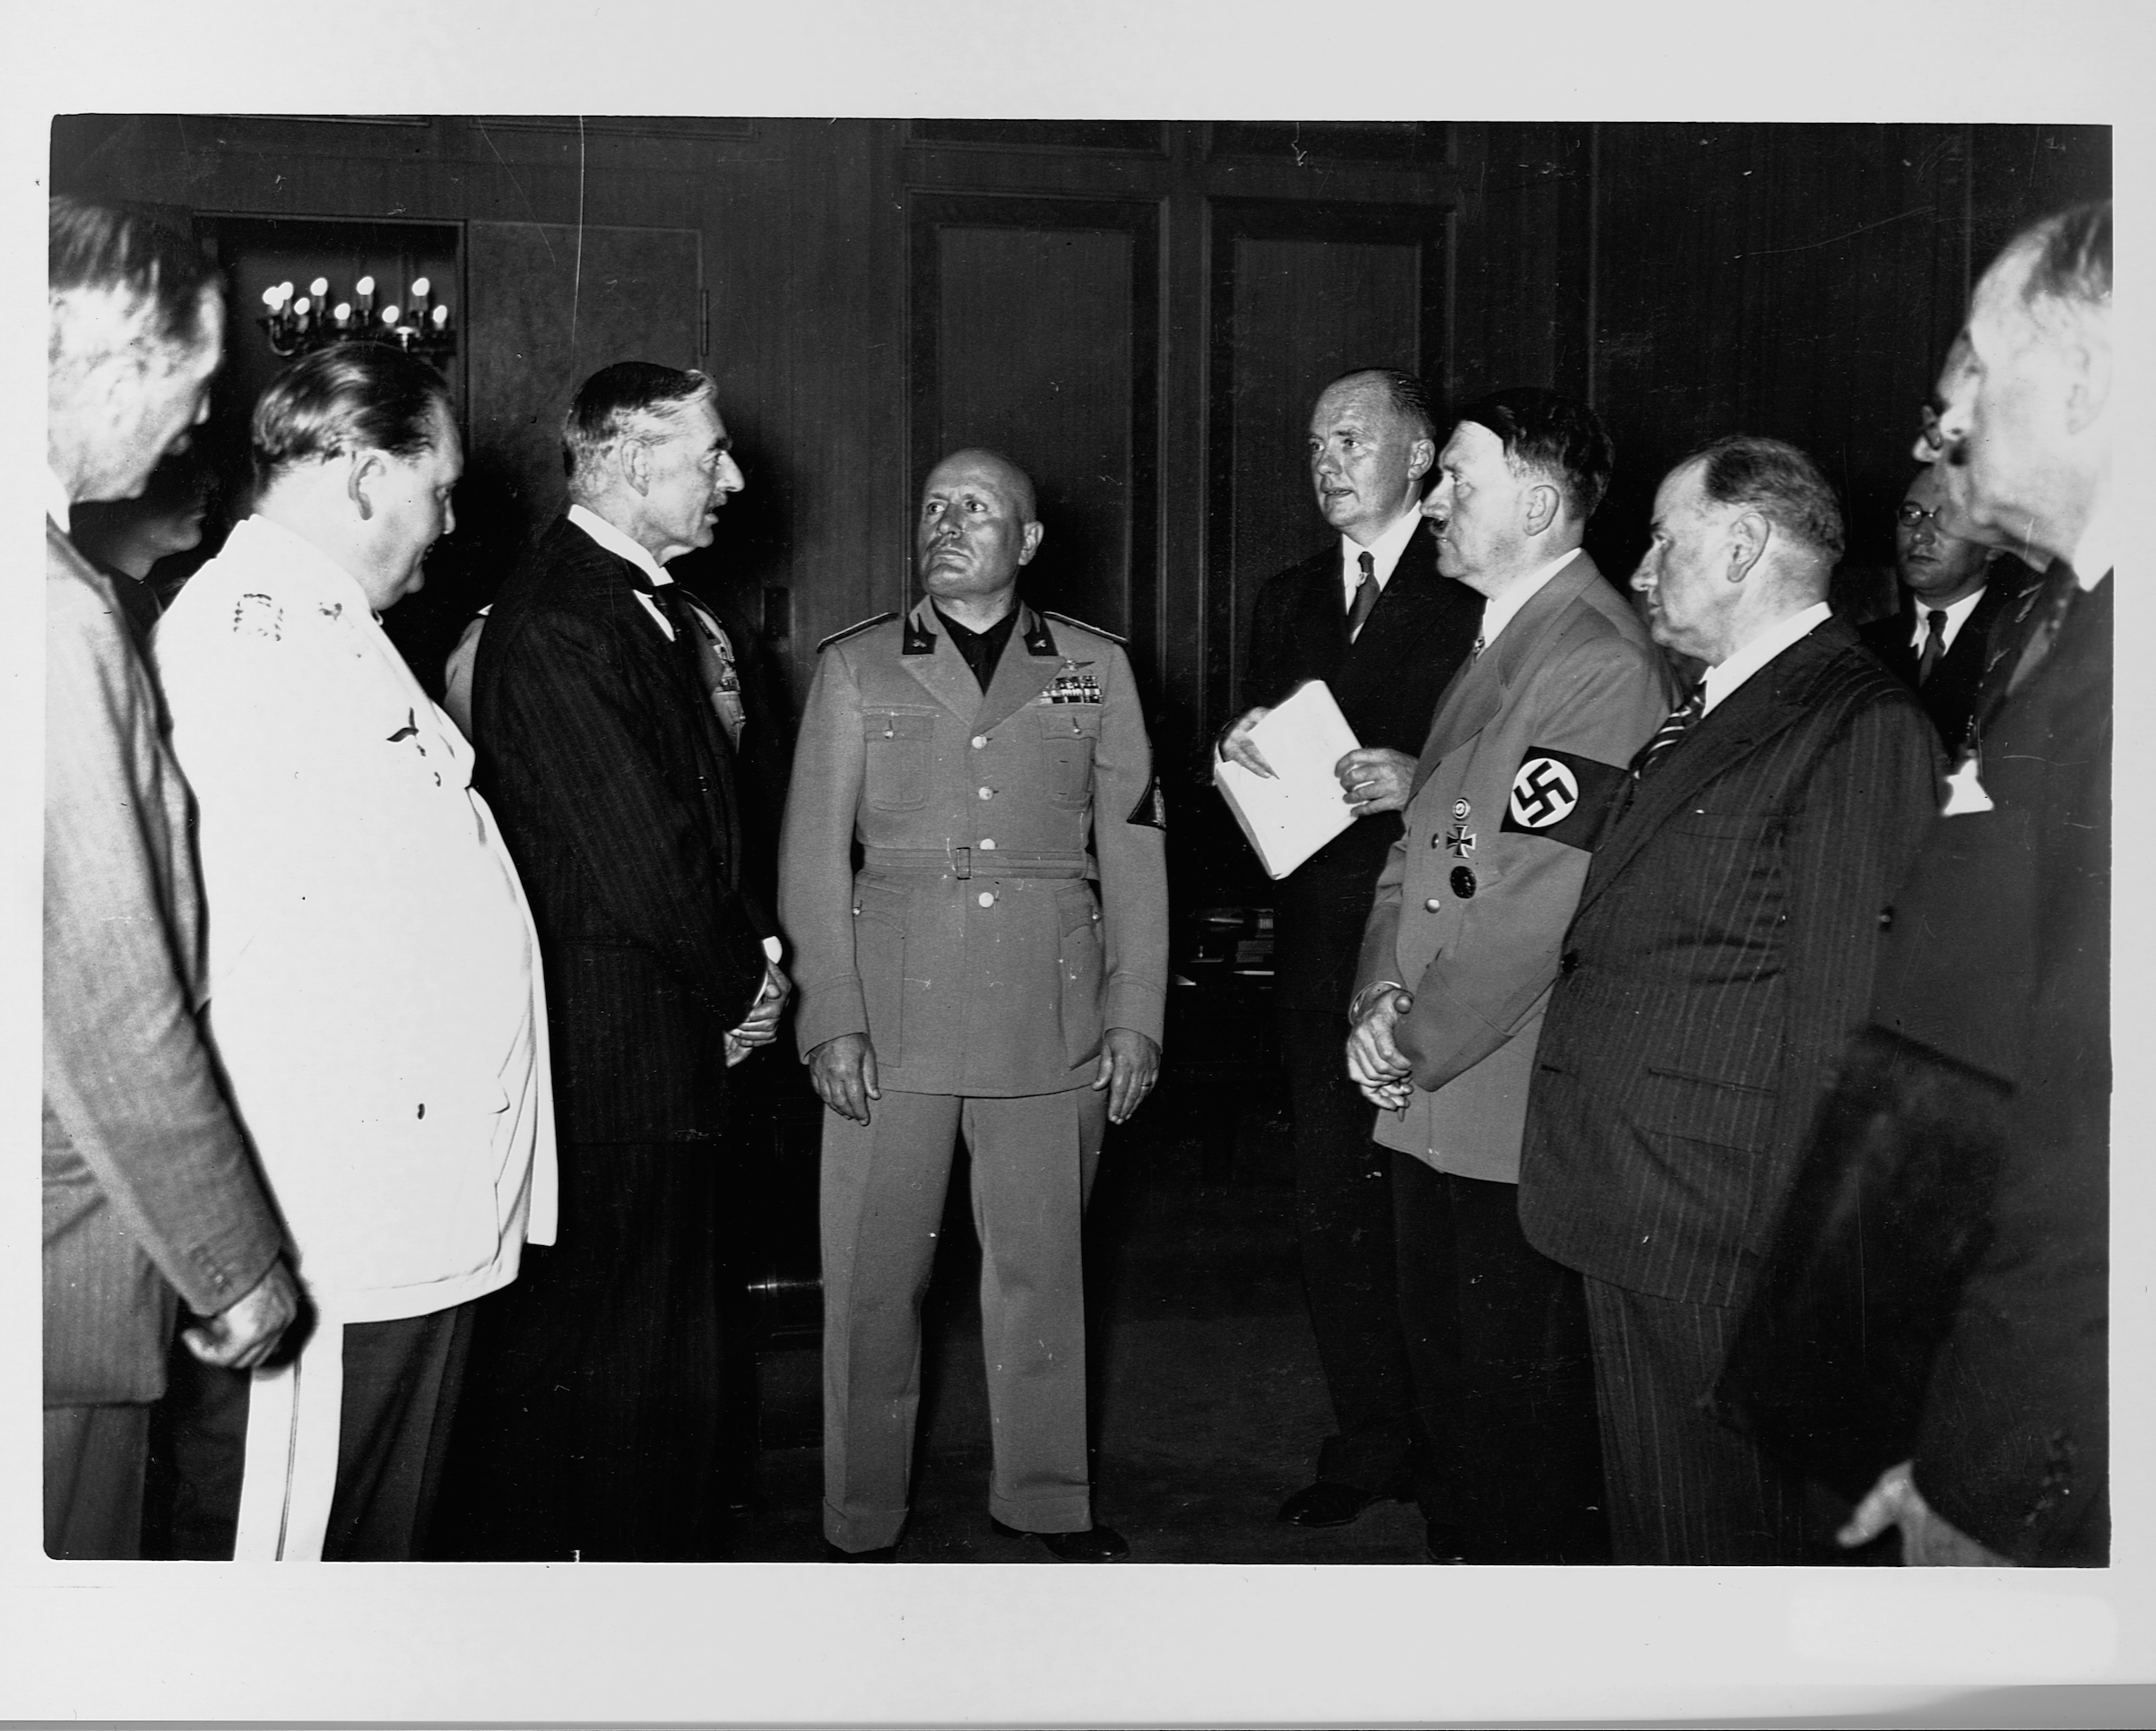 Neville Chamberlain, Adolph Hitler, Benito Mussolini, and Hermann Goering stand together at the Munich Conference in 1938. (Library of Congress&mdash;Corbis/VCG via Getty Images)